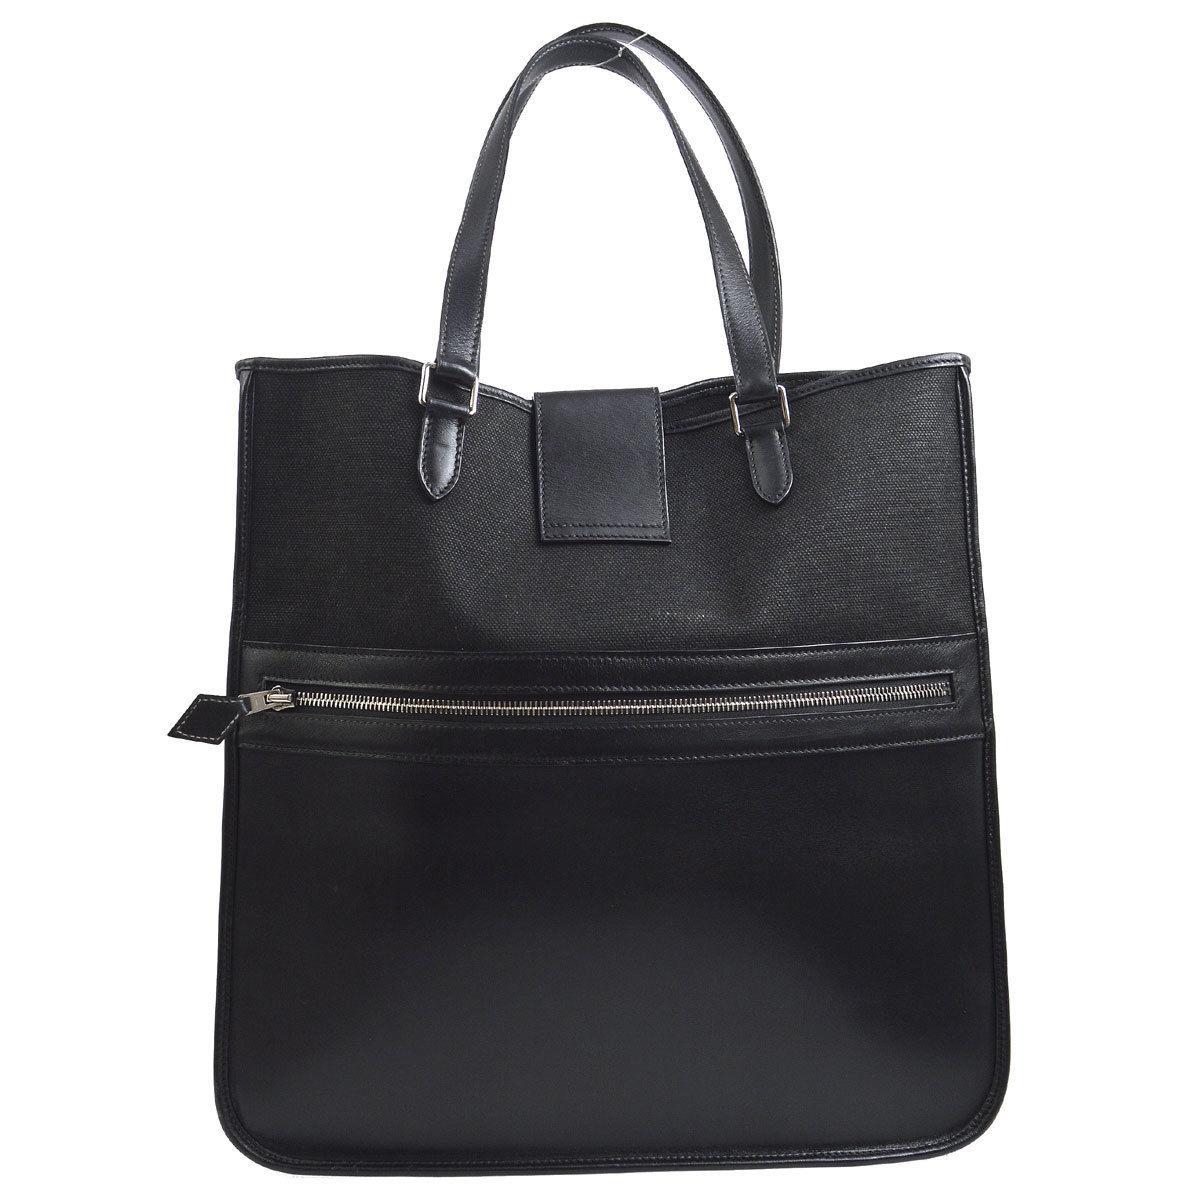 Hermes Black Leather Canvas Top Handle Carryall Travel Tote Bag